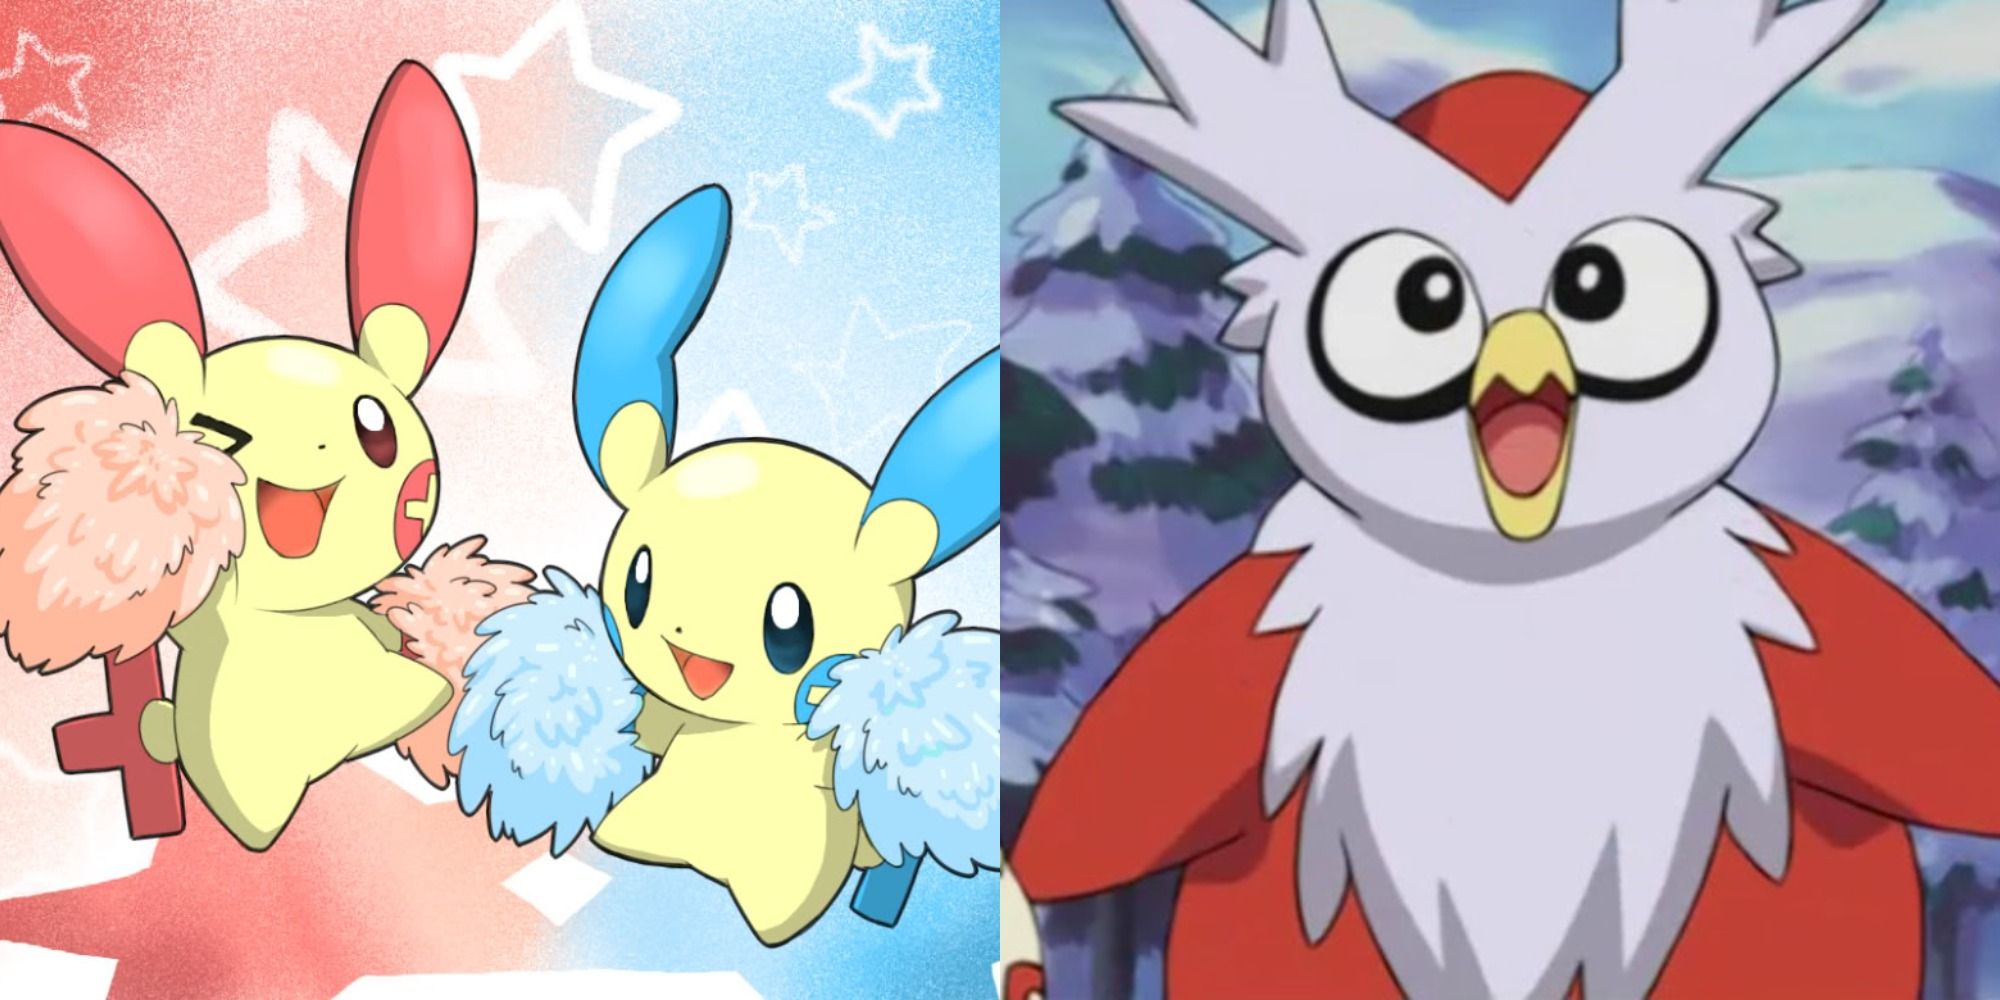 Split image of Plusle and Minun cheering, with Delibird from Pokémon